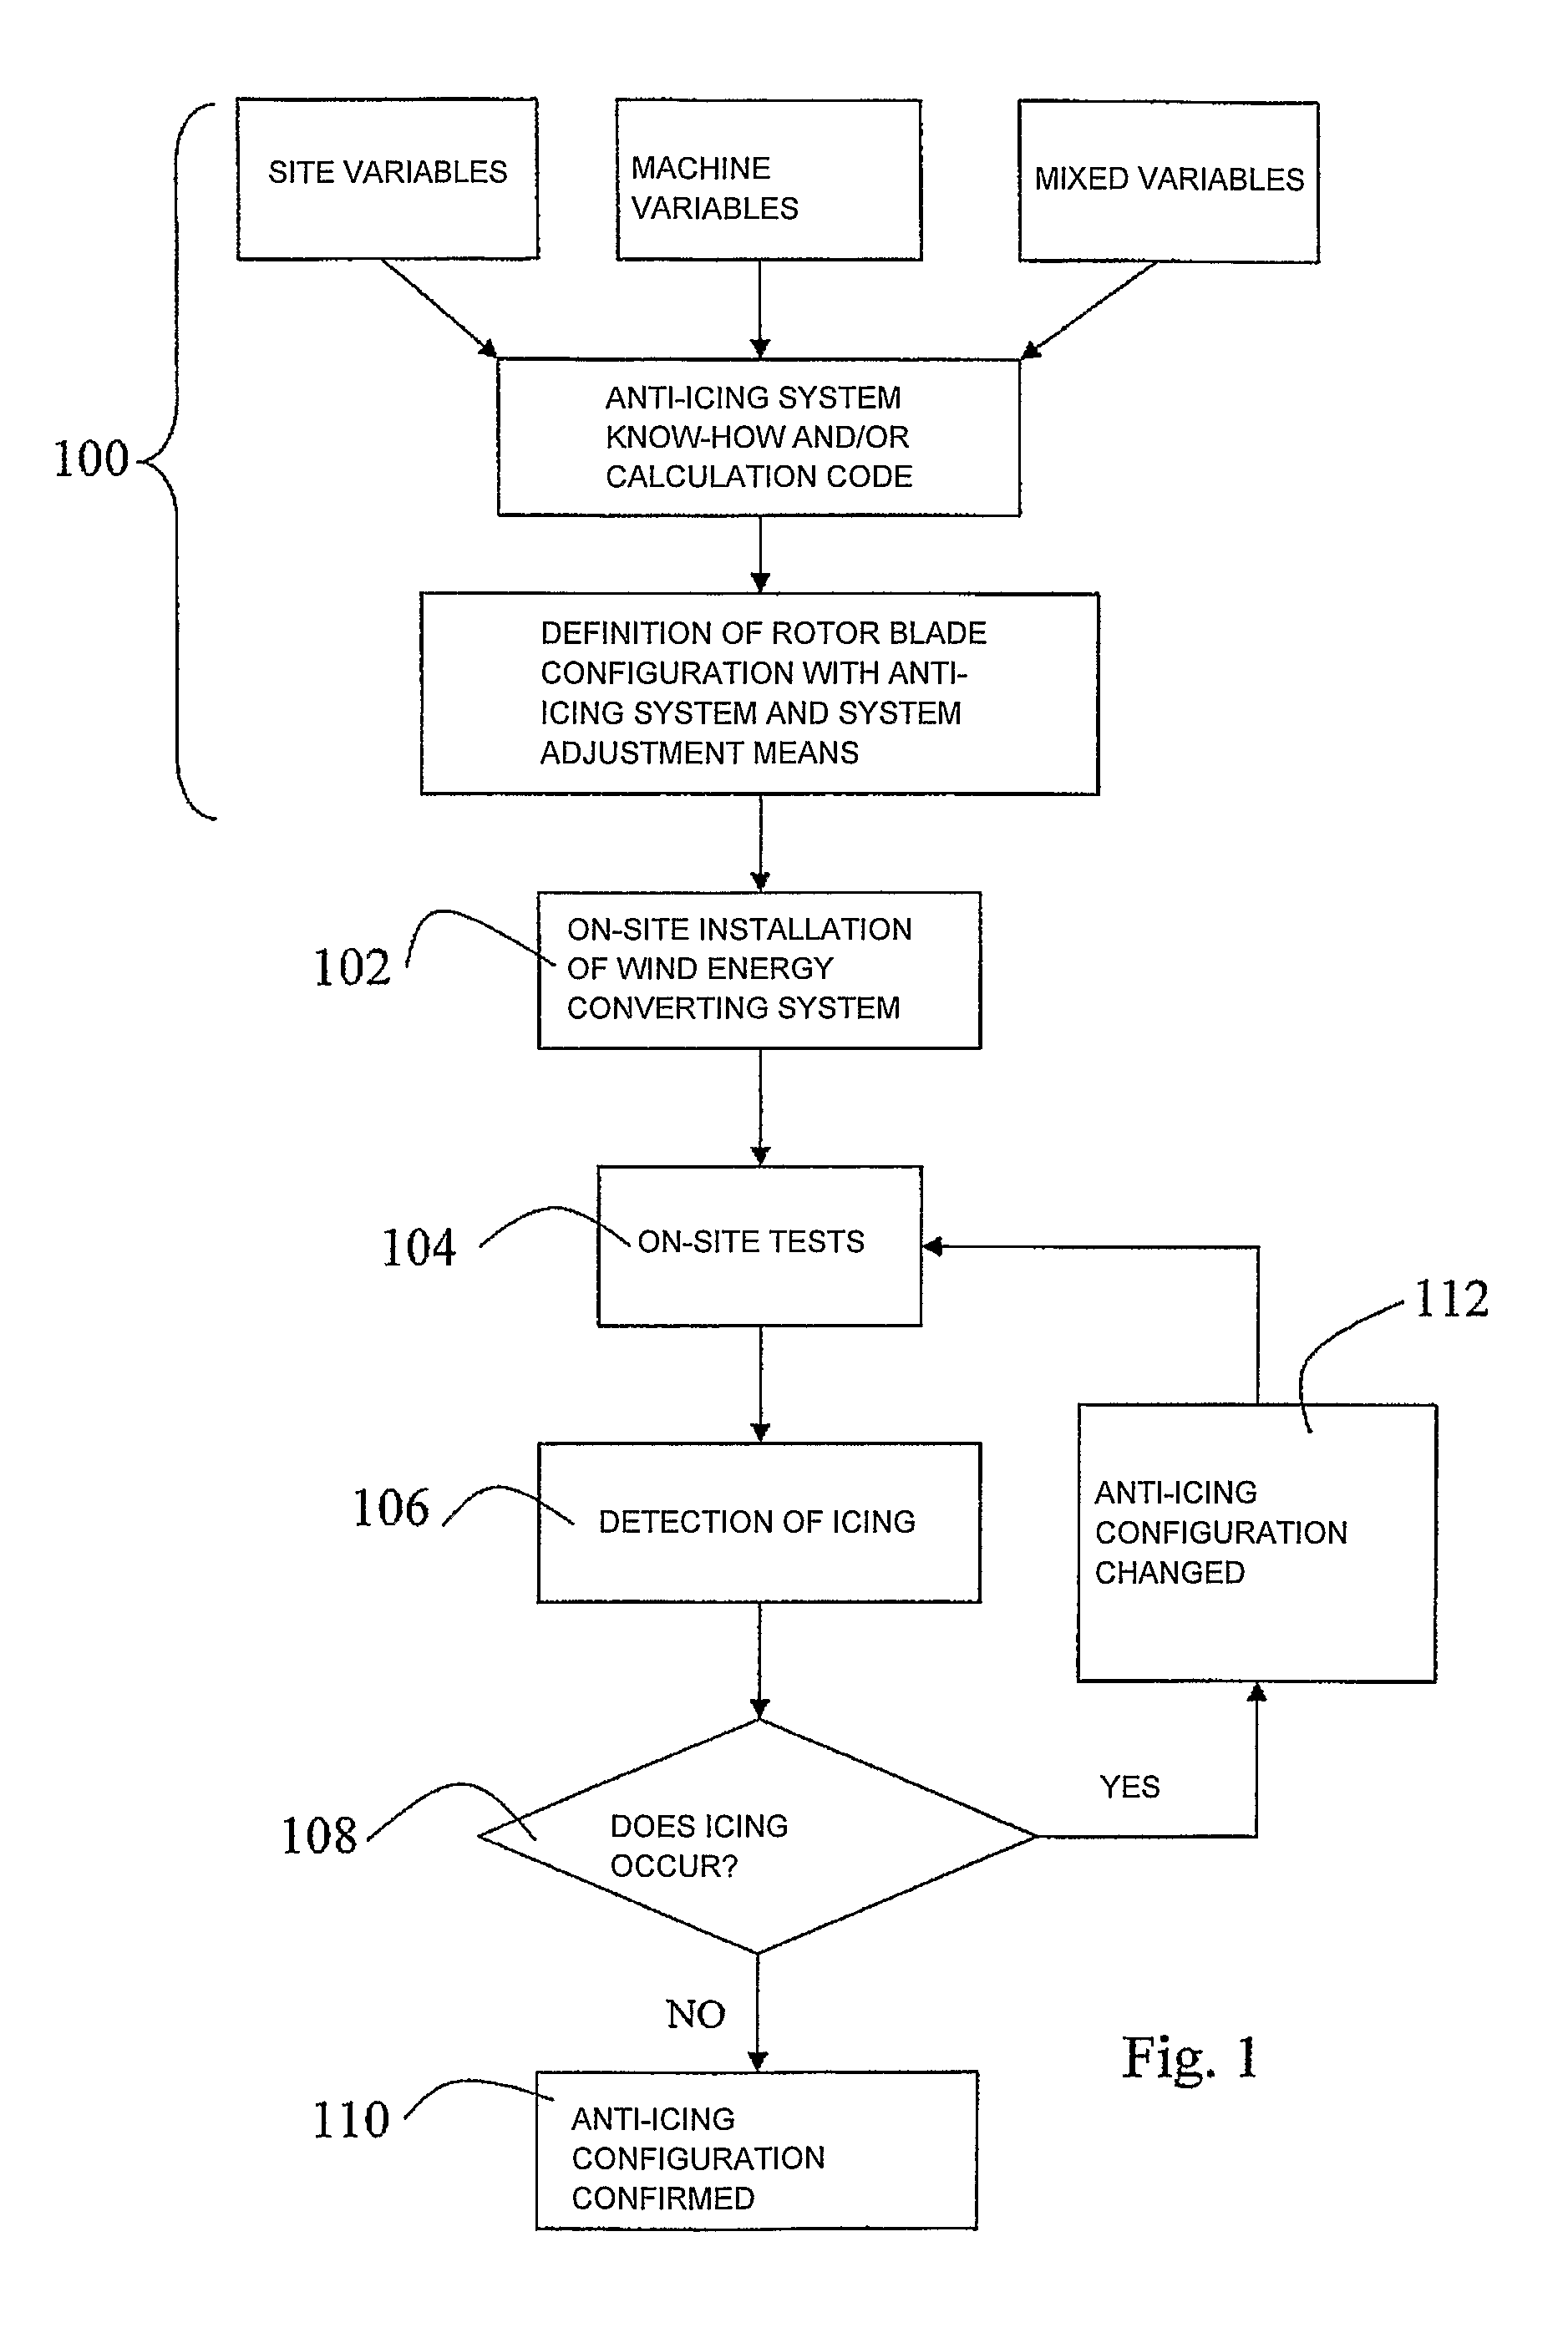 Method for implementing wind energy converting systems